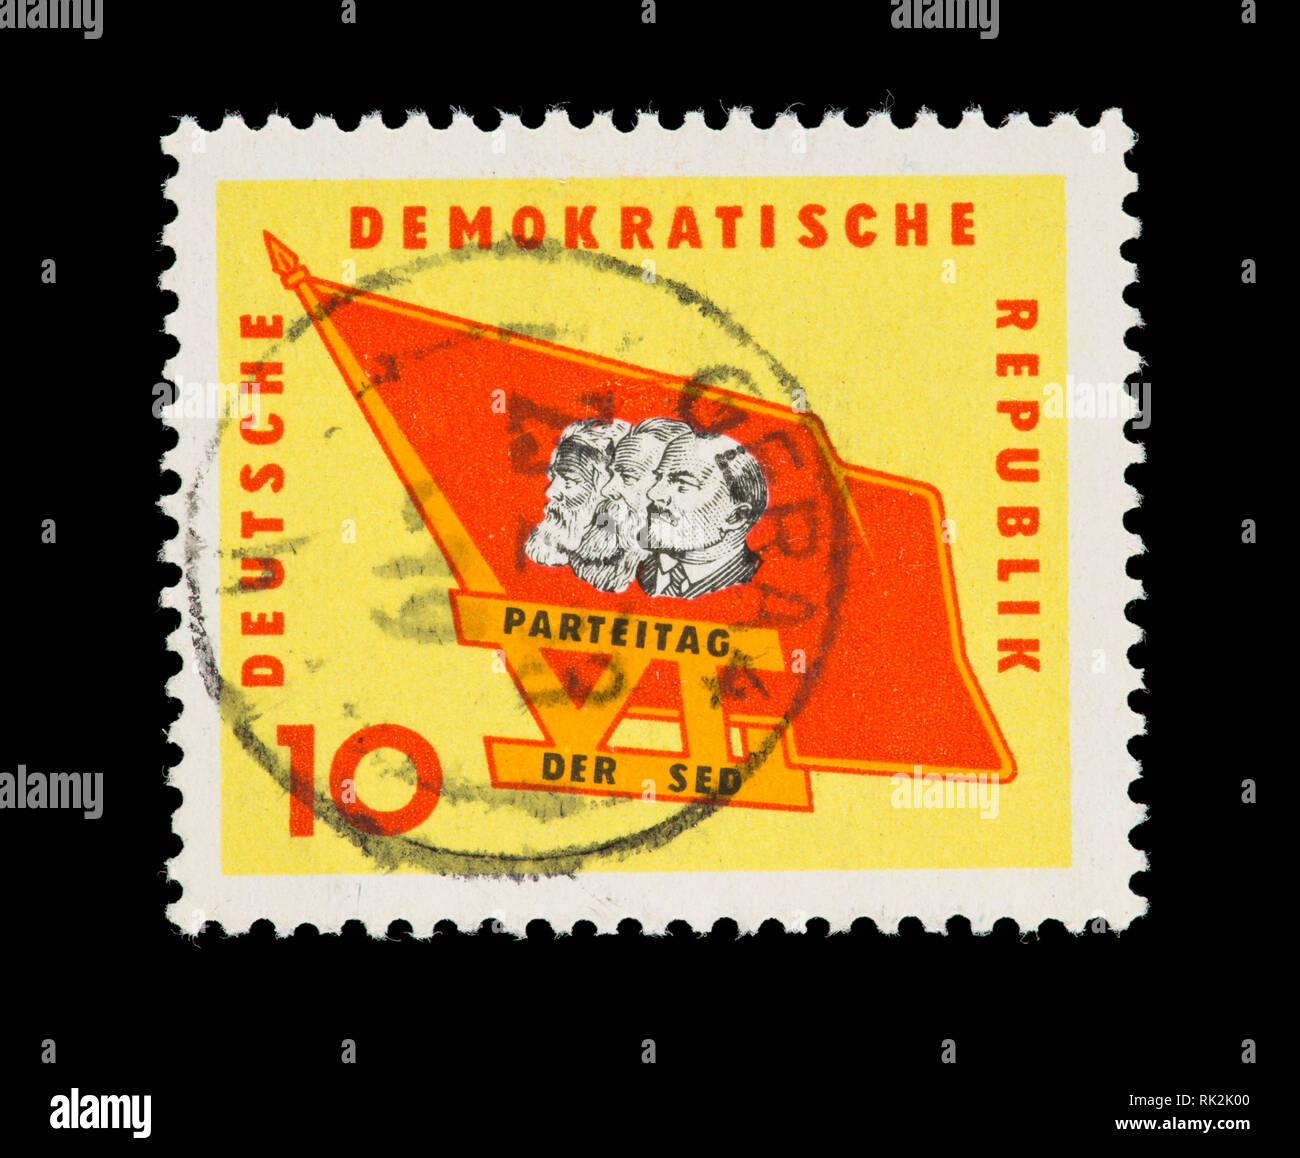 Postage stamp from East Germany (DDR) depicting Marx, Engels and Lenin, issued for the 6th Congress of Socialist Unity Party of Germany. Stock Photo